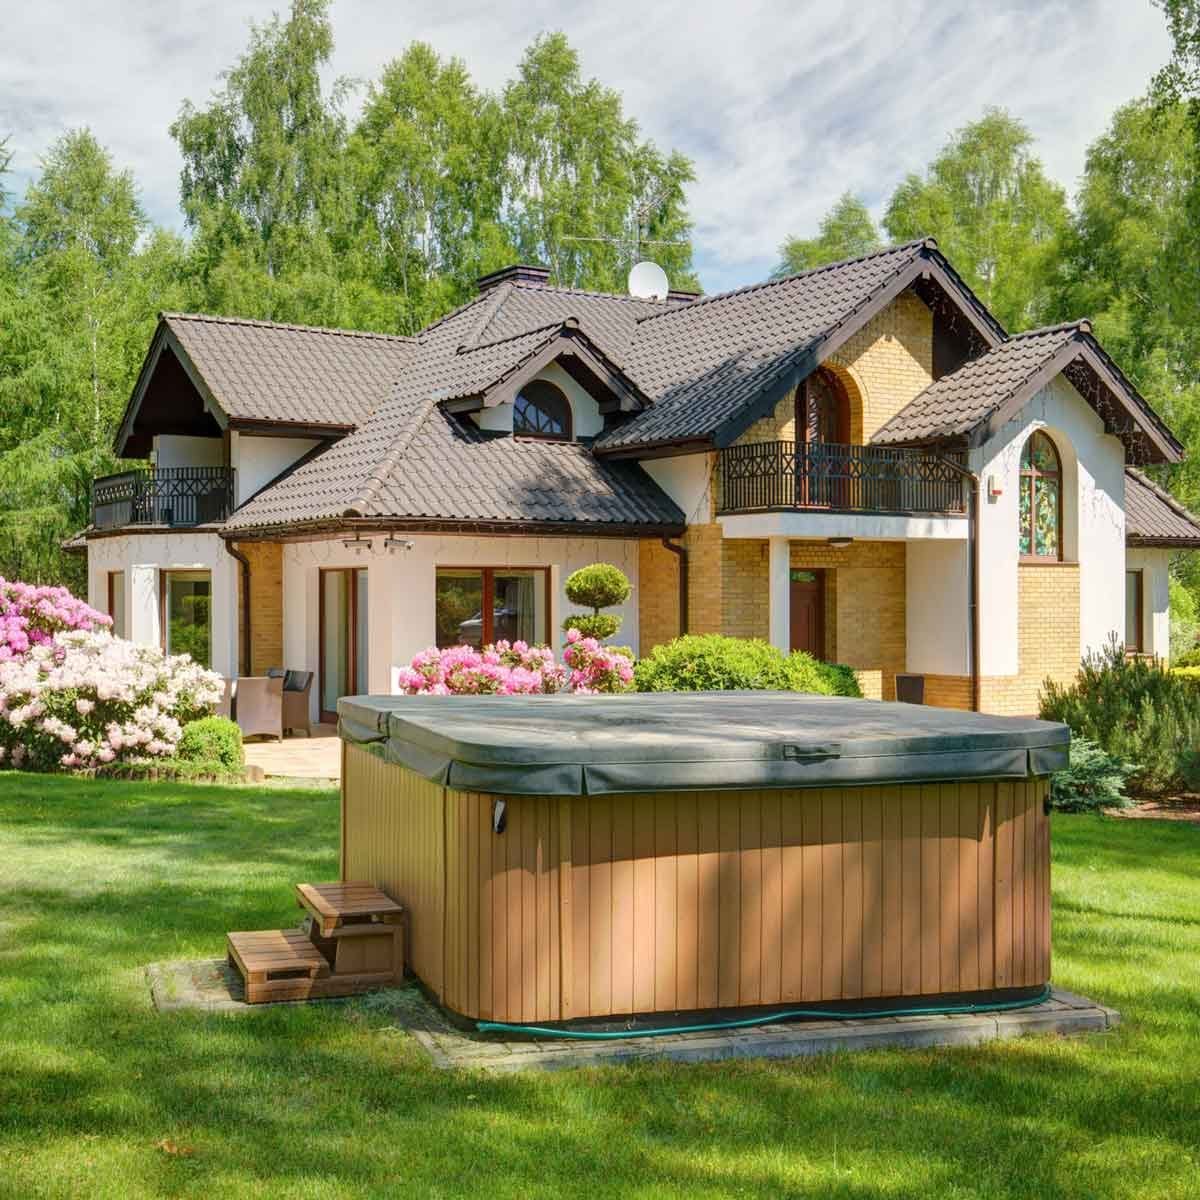 What to Know About Outdoor Hot Tubs